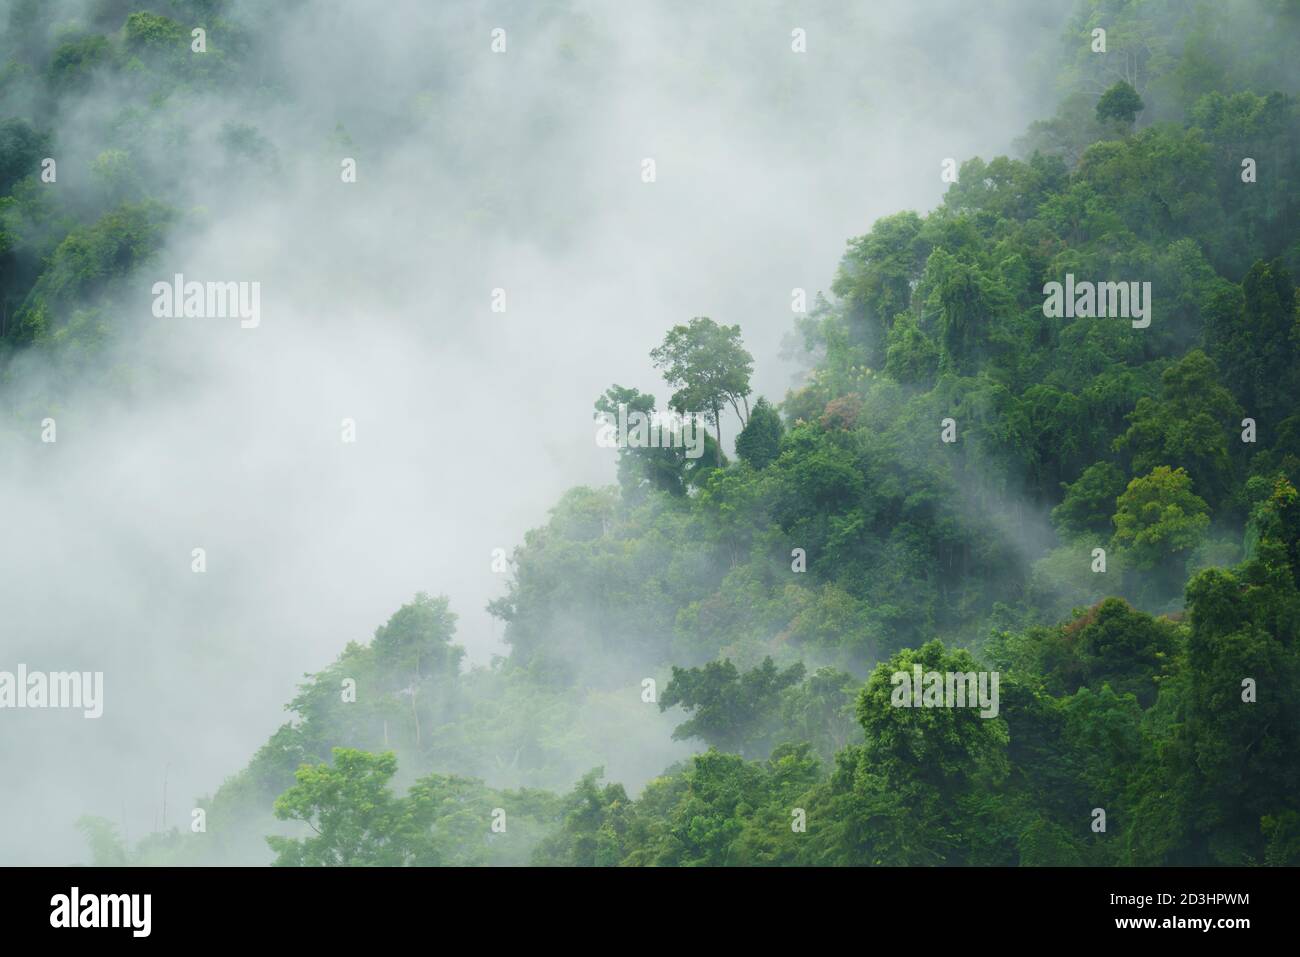 tropical forest landscape with fog and mist Stock Photo